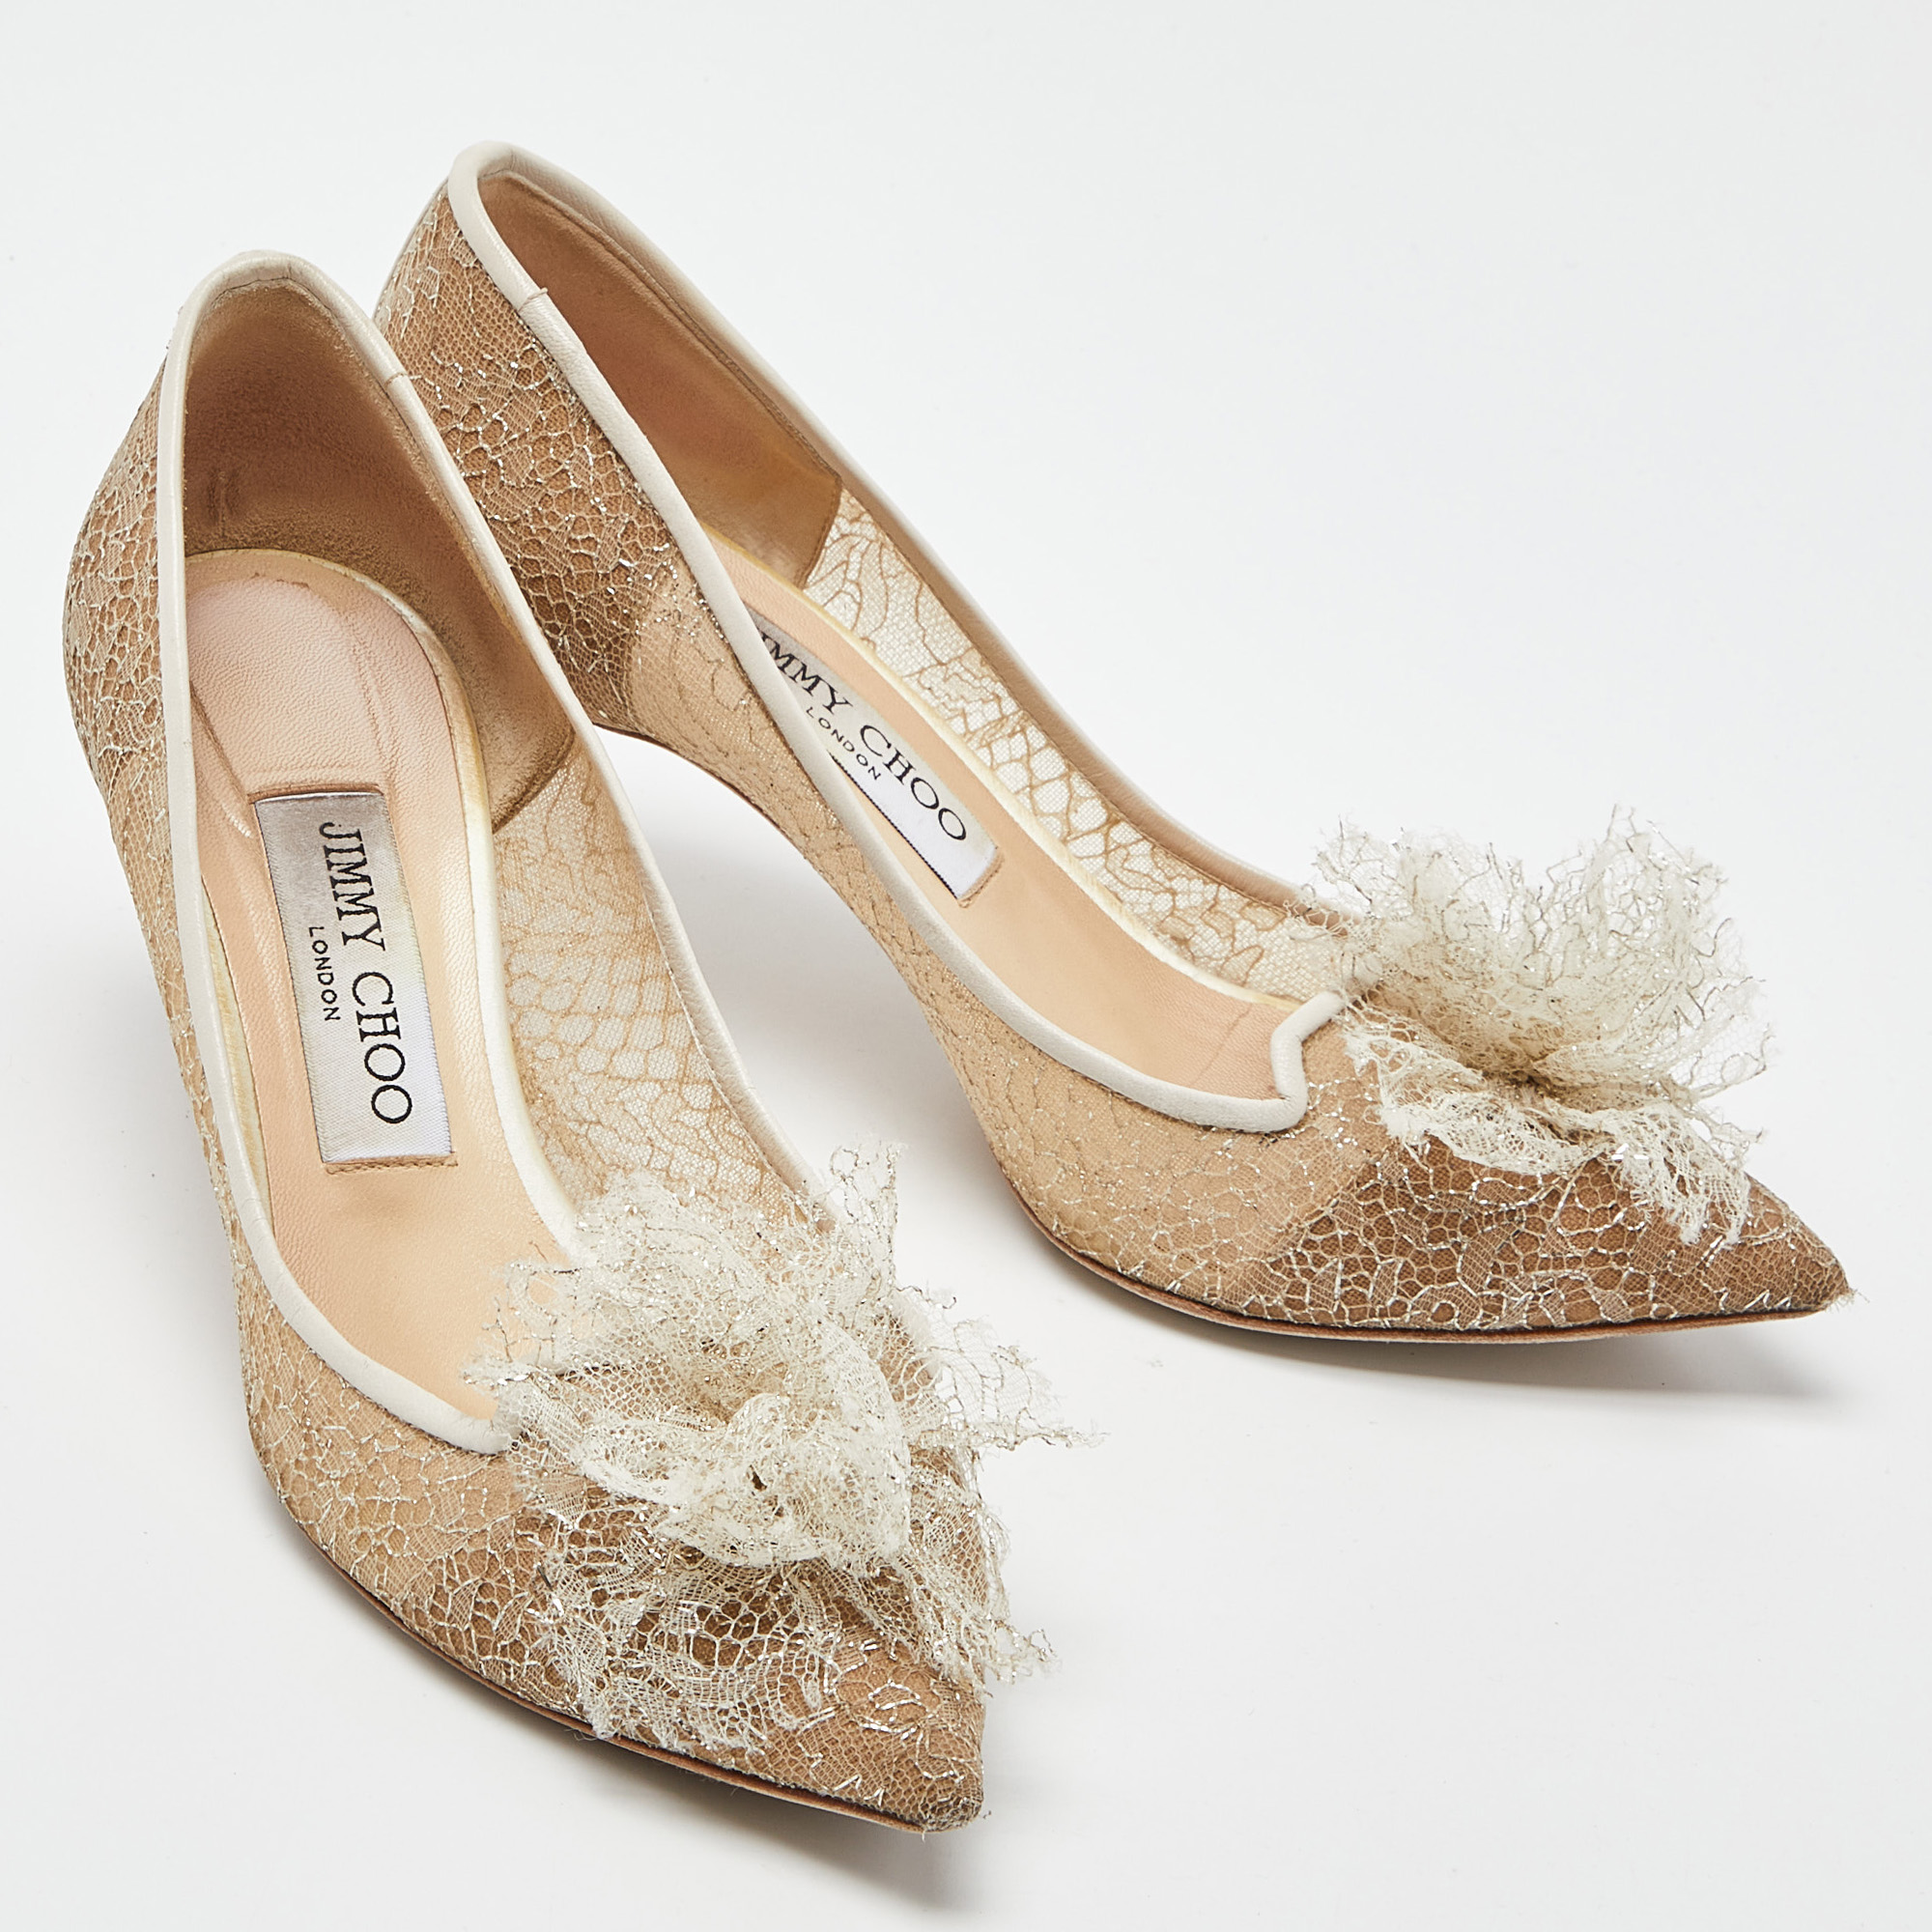 Jimmy Choo Beige Lace And Leather Pointed Toe Pumps Size 36.5